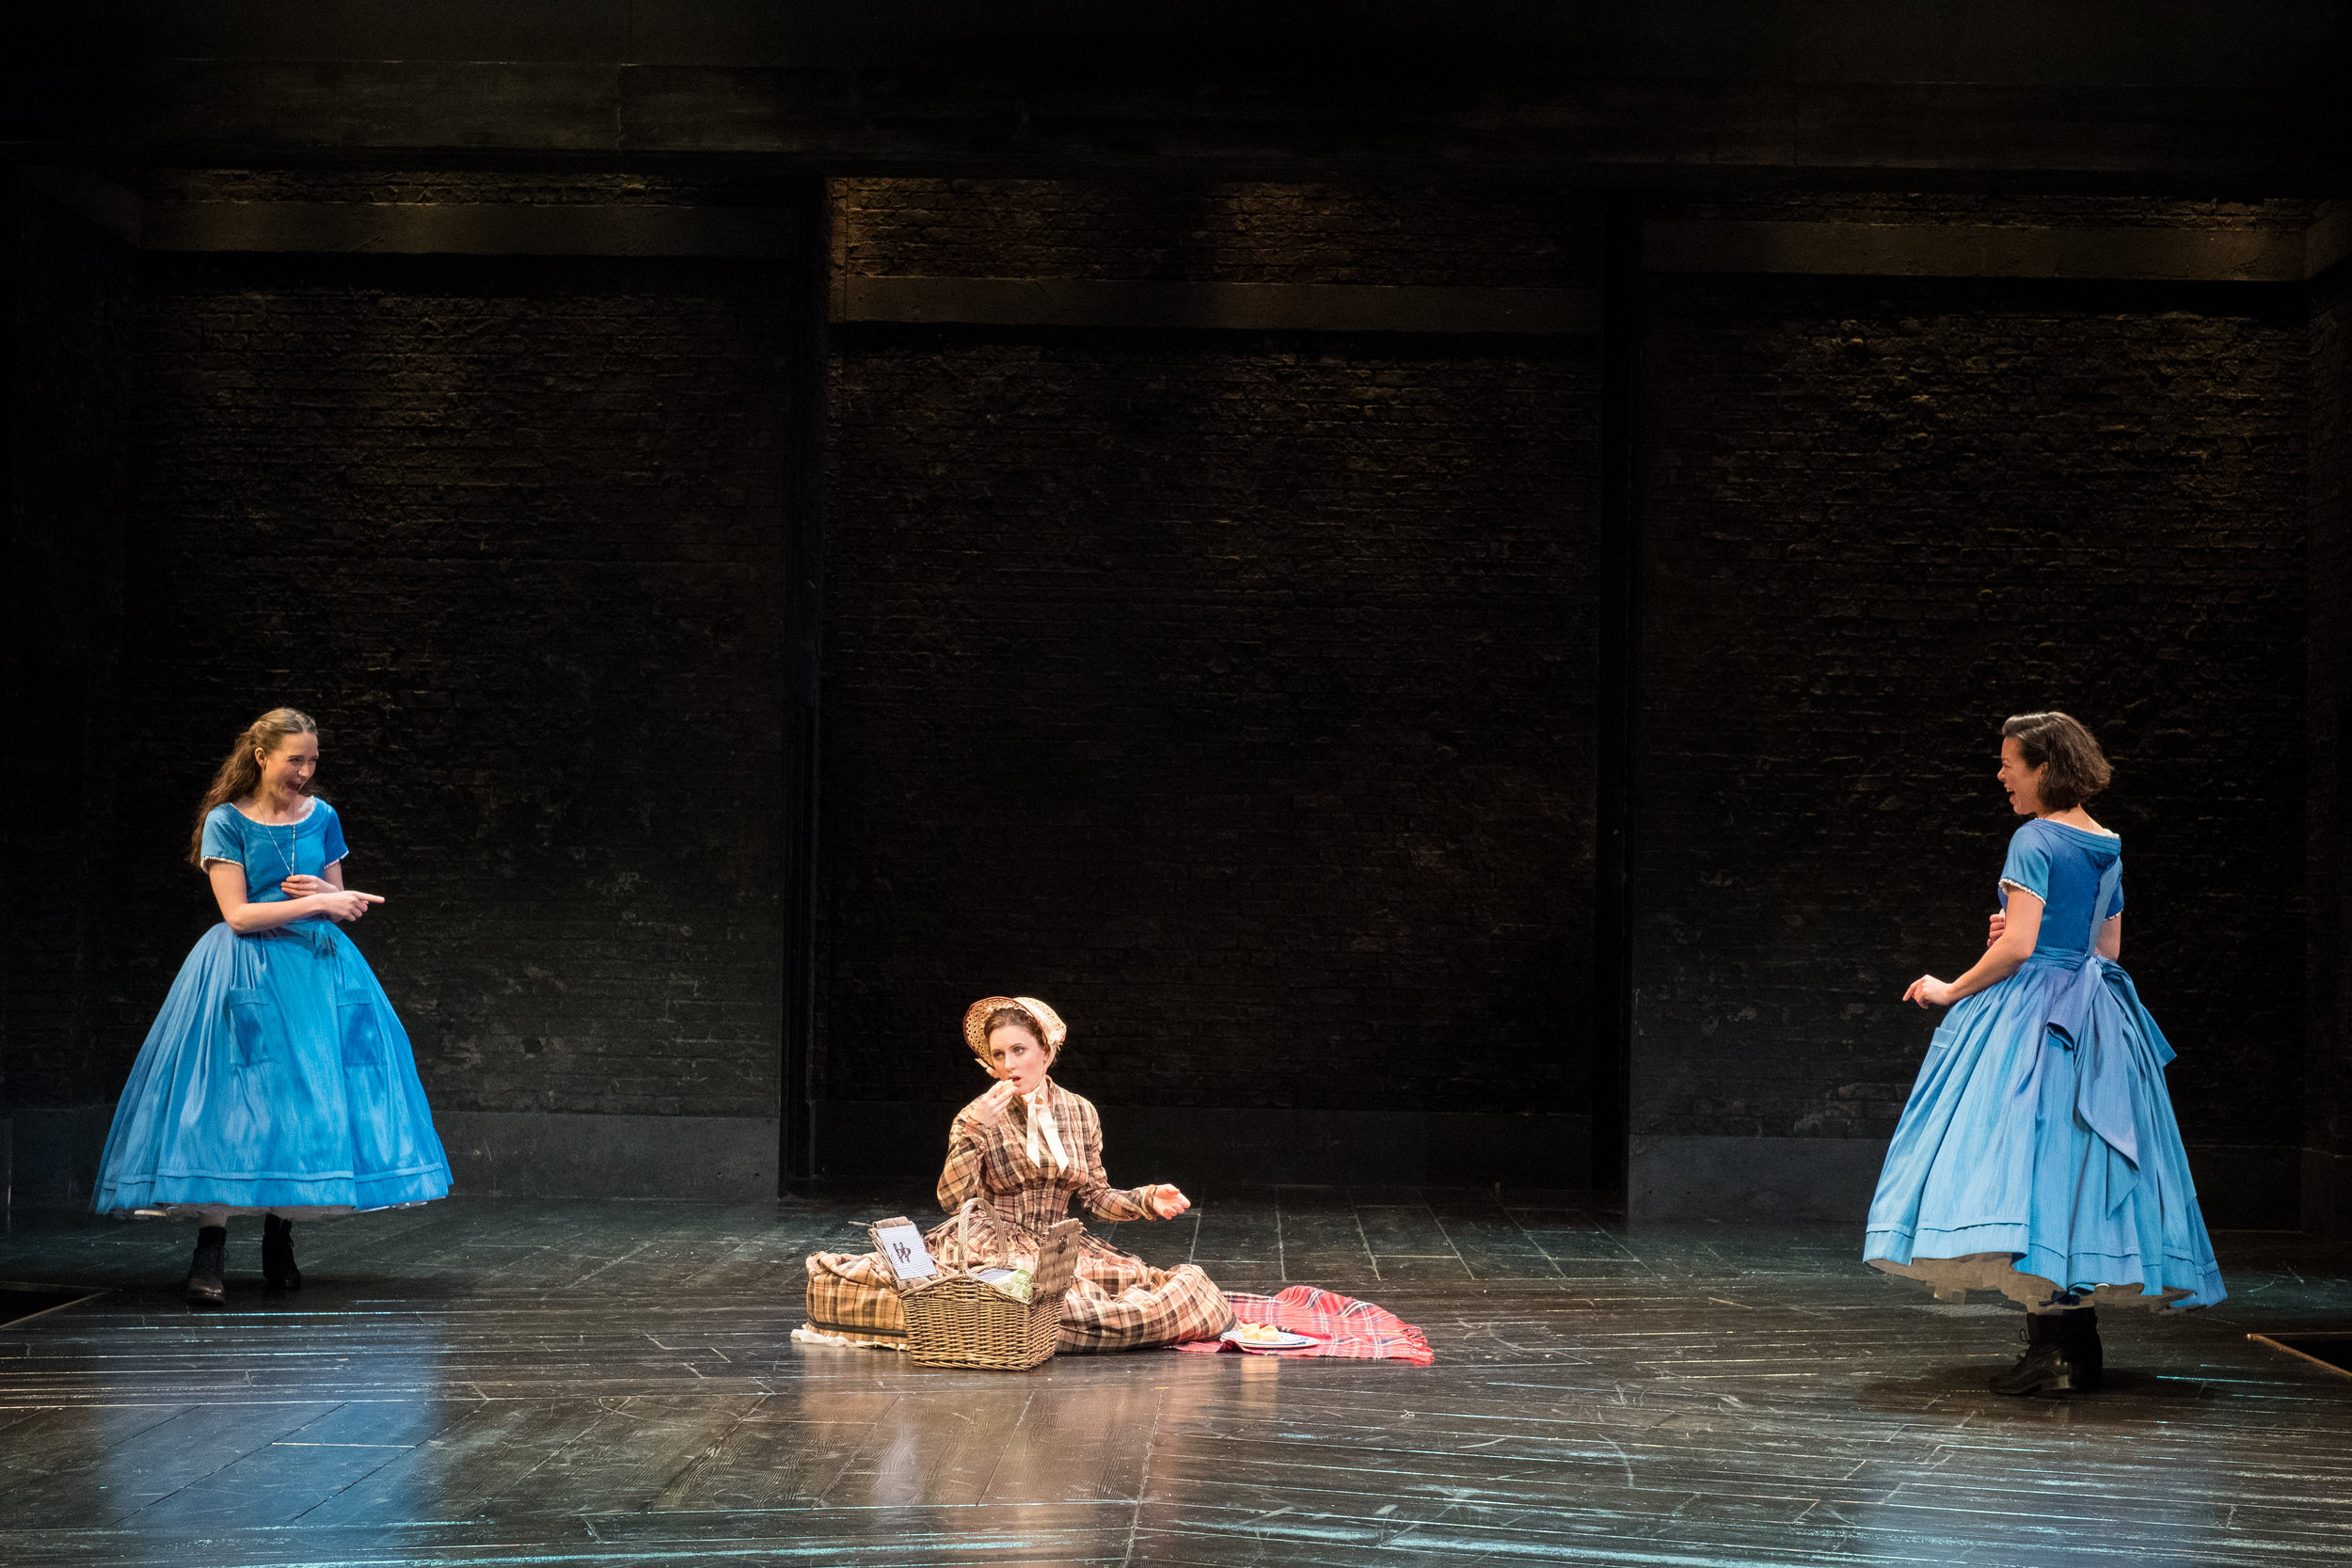  Anna Leong Brophy, Rebecca Birch &amp; Barbara Hockaday in Alice in Wonderland, Storyhouse, composed by Jude Obermüller (photo by Mark McNulty) 